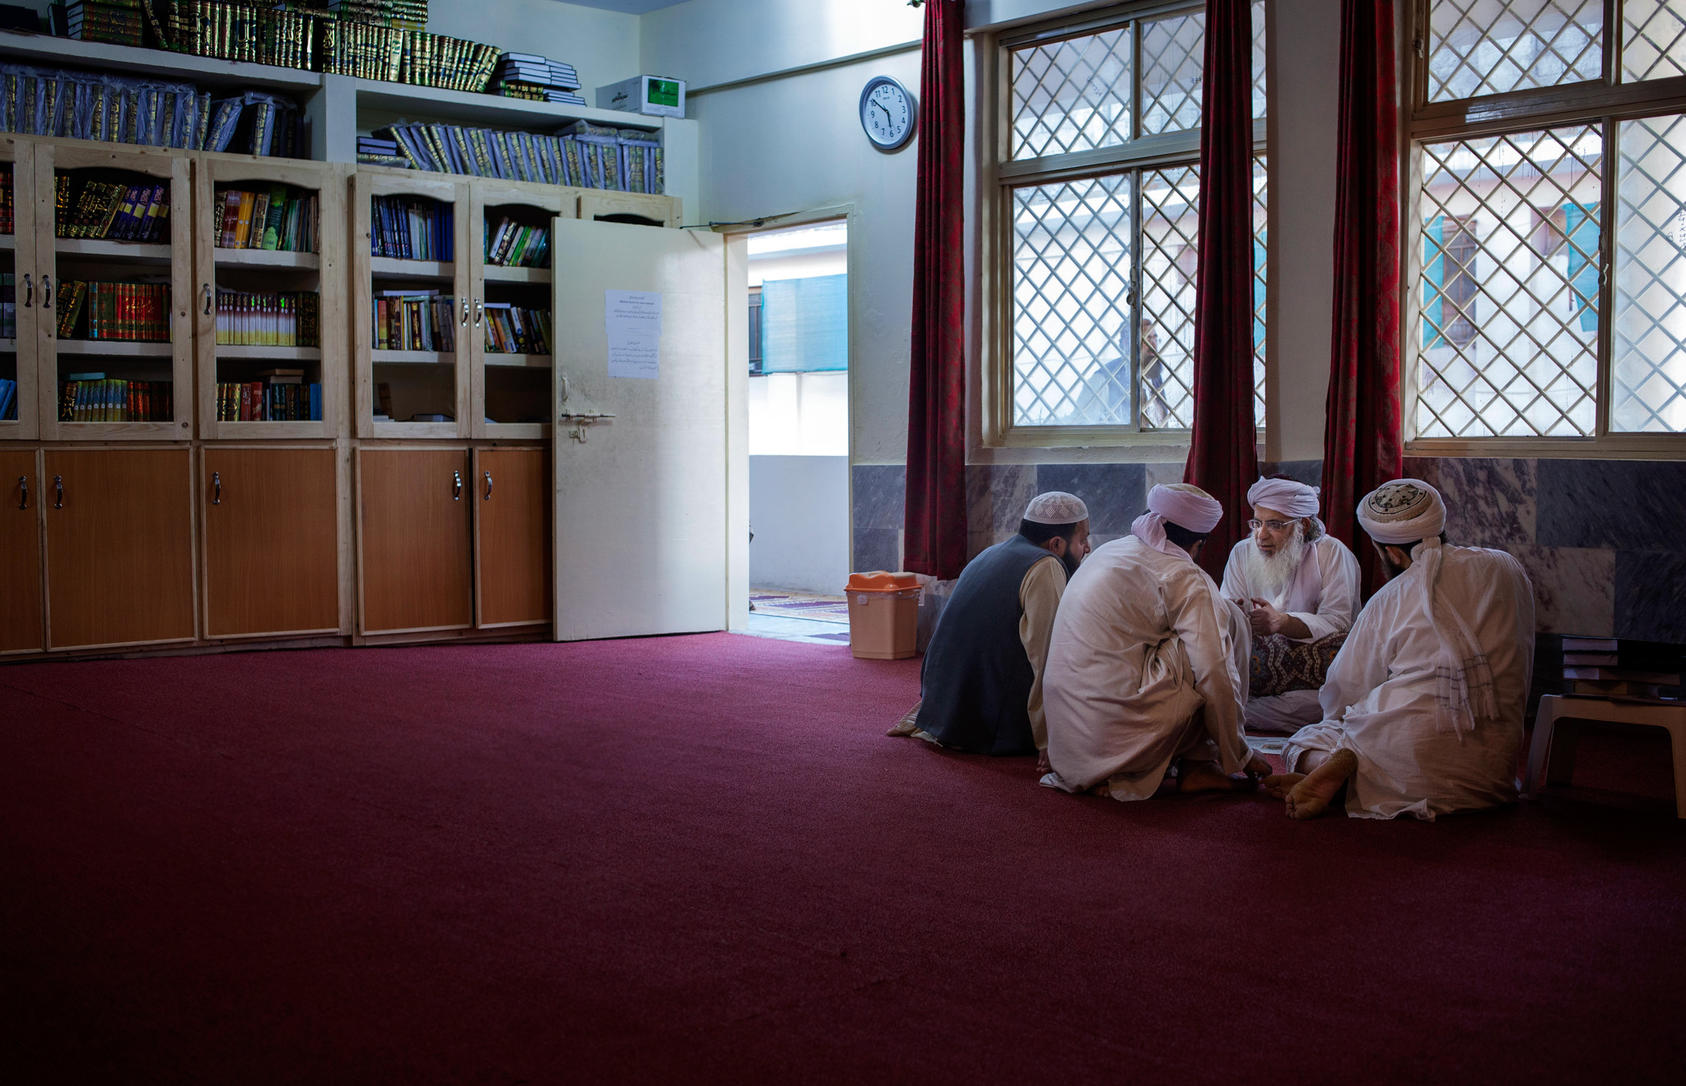 Maulana Abdul Aziz, second from right, chief cleric of the Red Mosque, speaks with visitors at the Red Mosque library named for Osama bin Laden in Islamabad, Pakistan, April 26, 2014. Photo Credit: The New York Times/Myra Iqbal